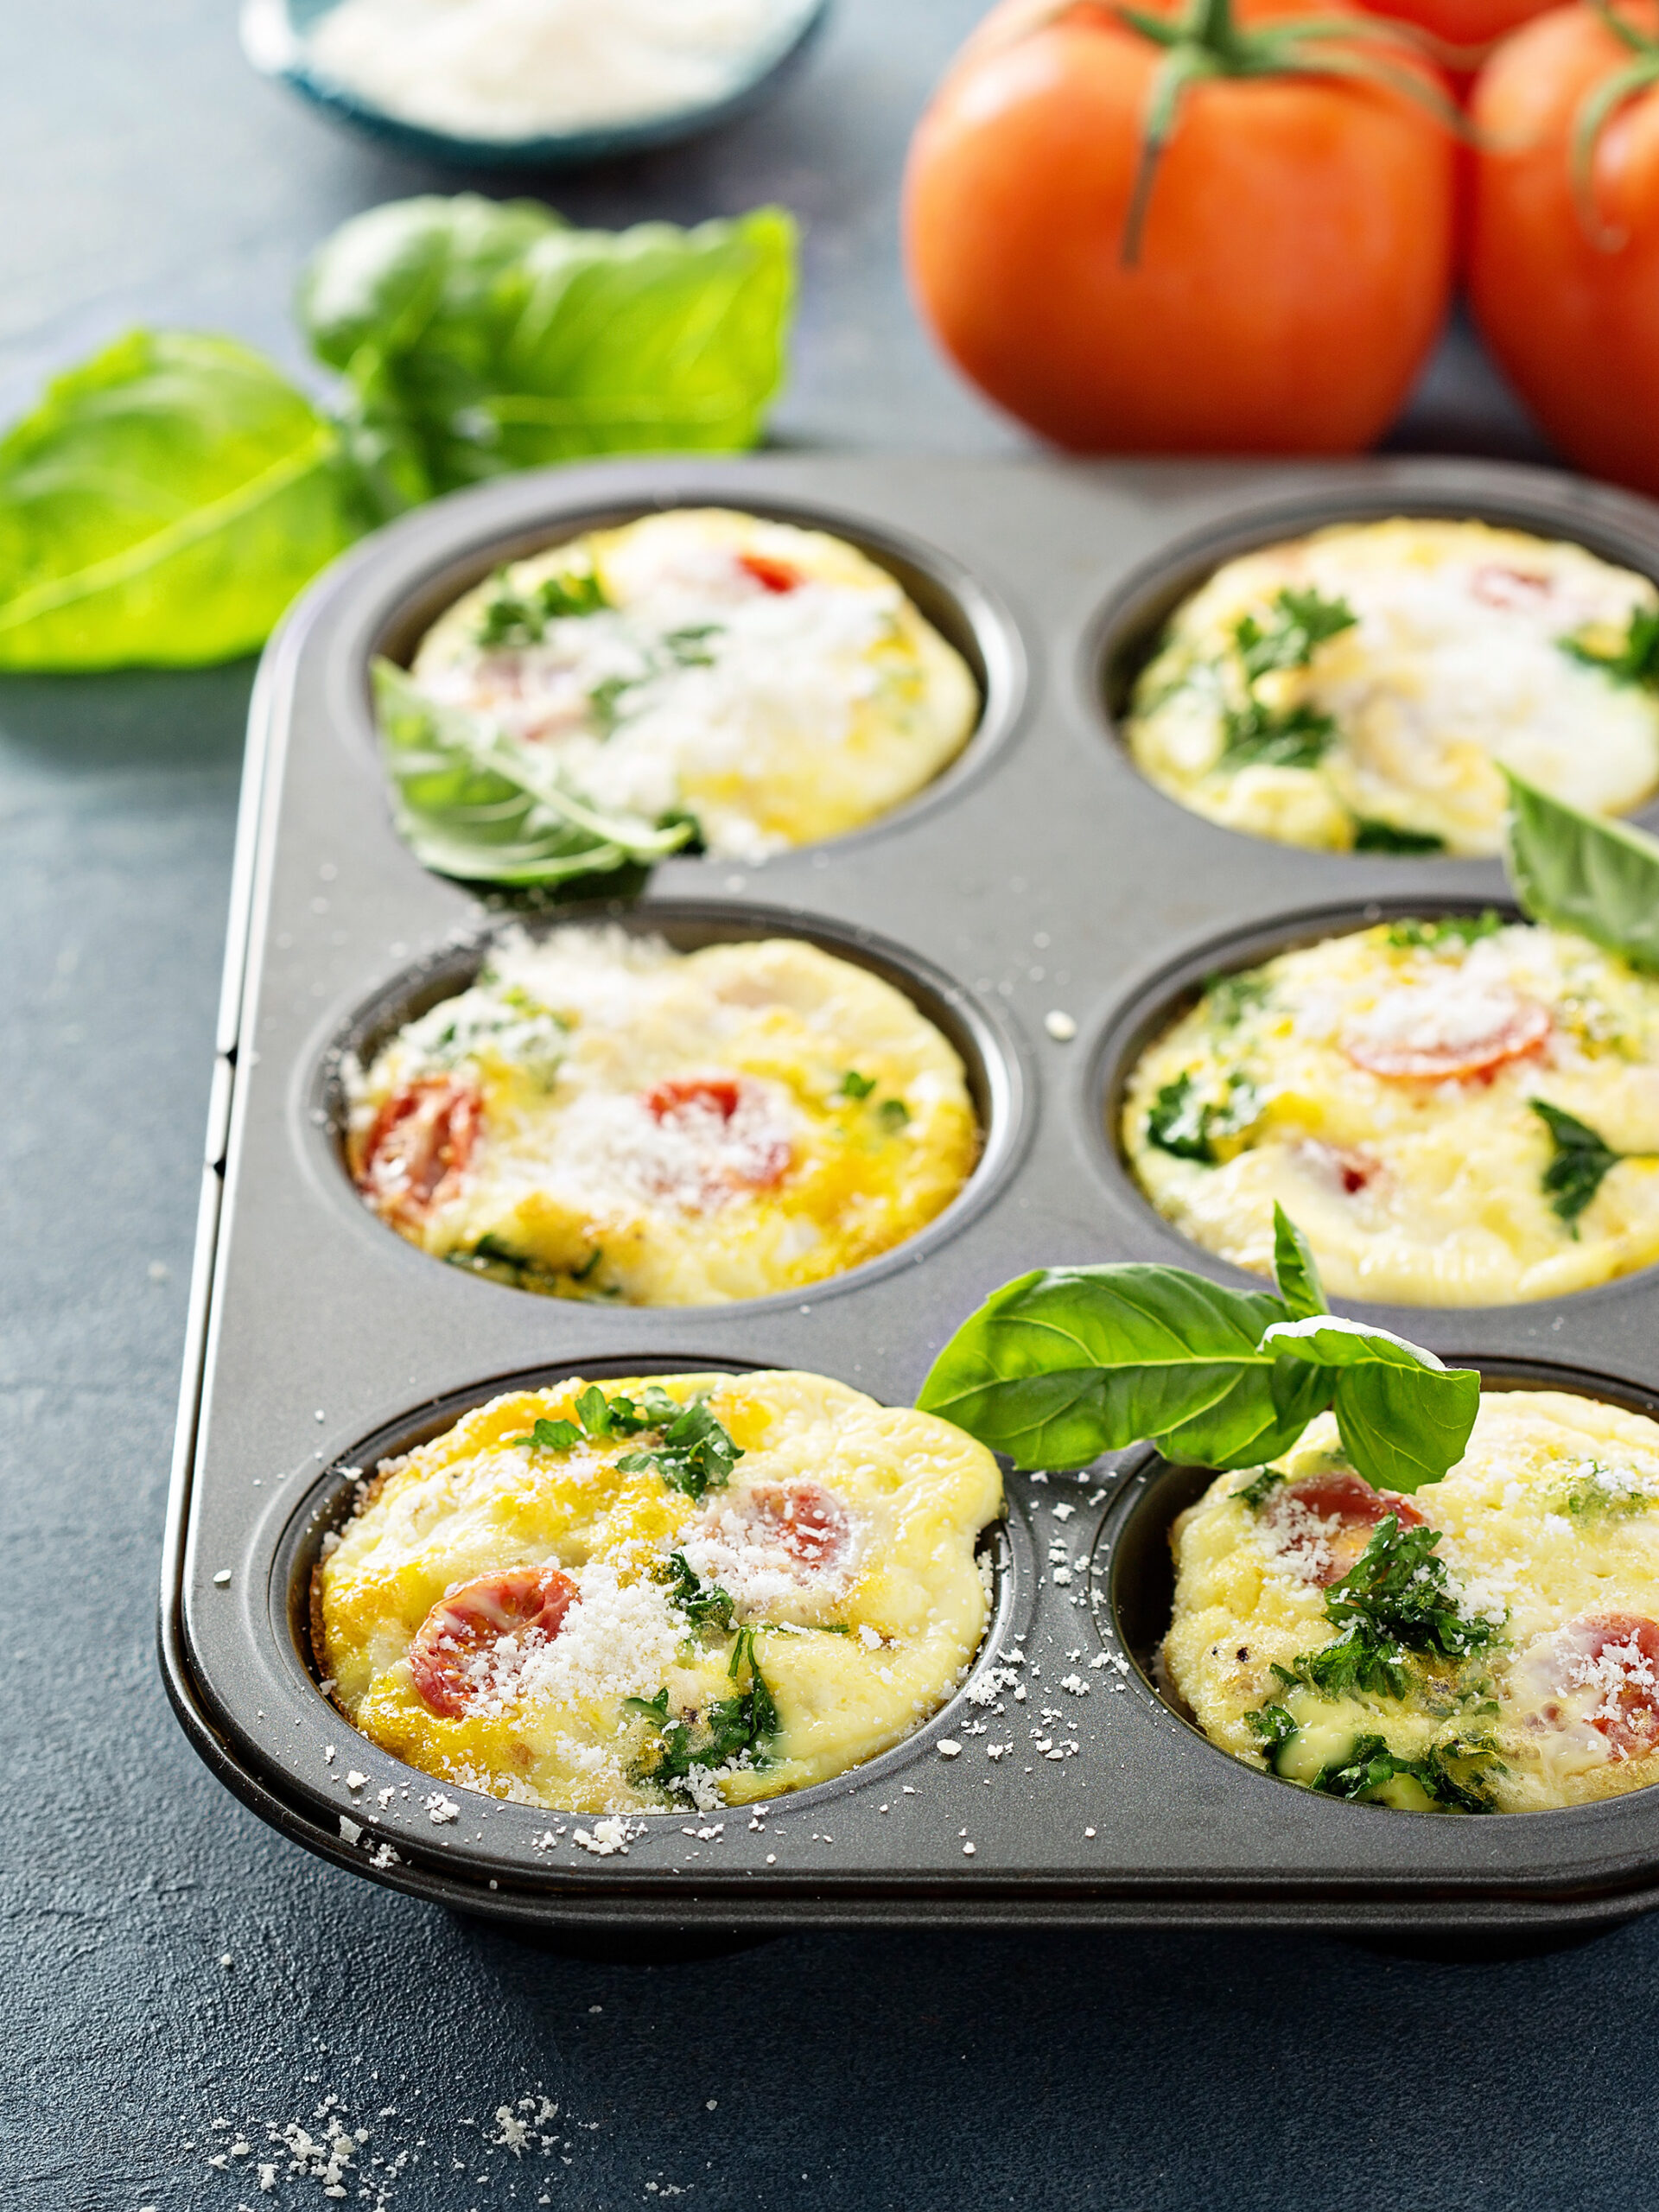 mini egg frittatas with veggies, baked in cupcake pan - healthy recipes to make with kids